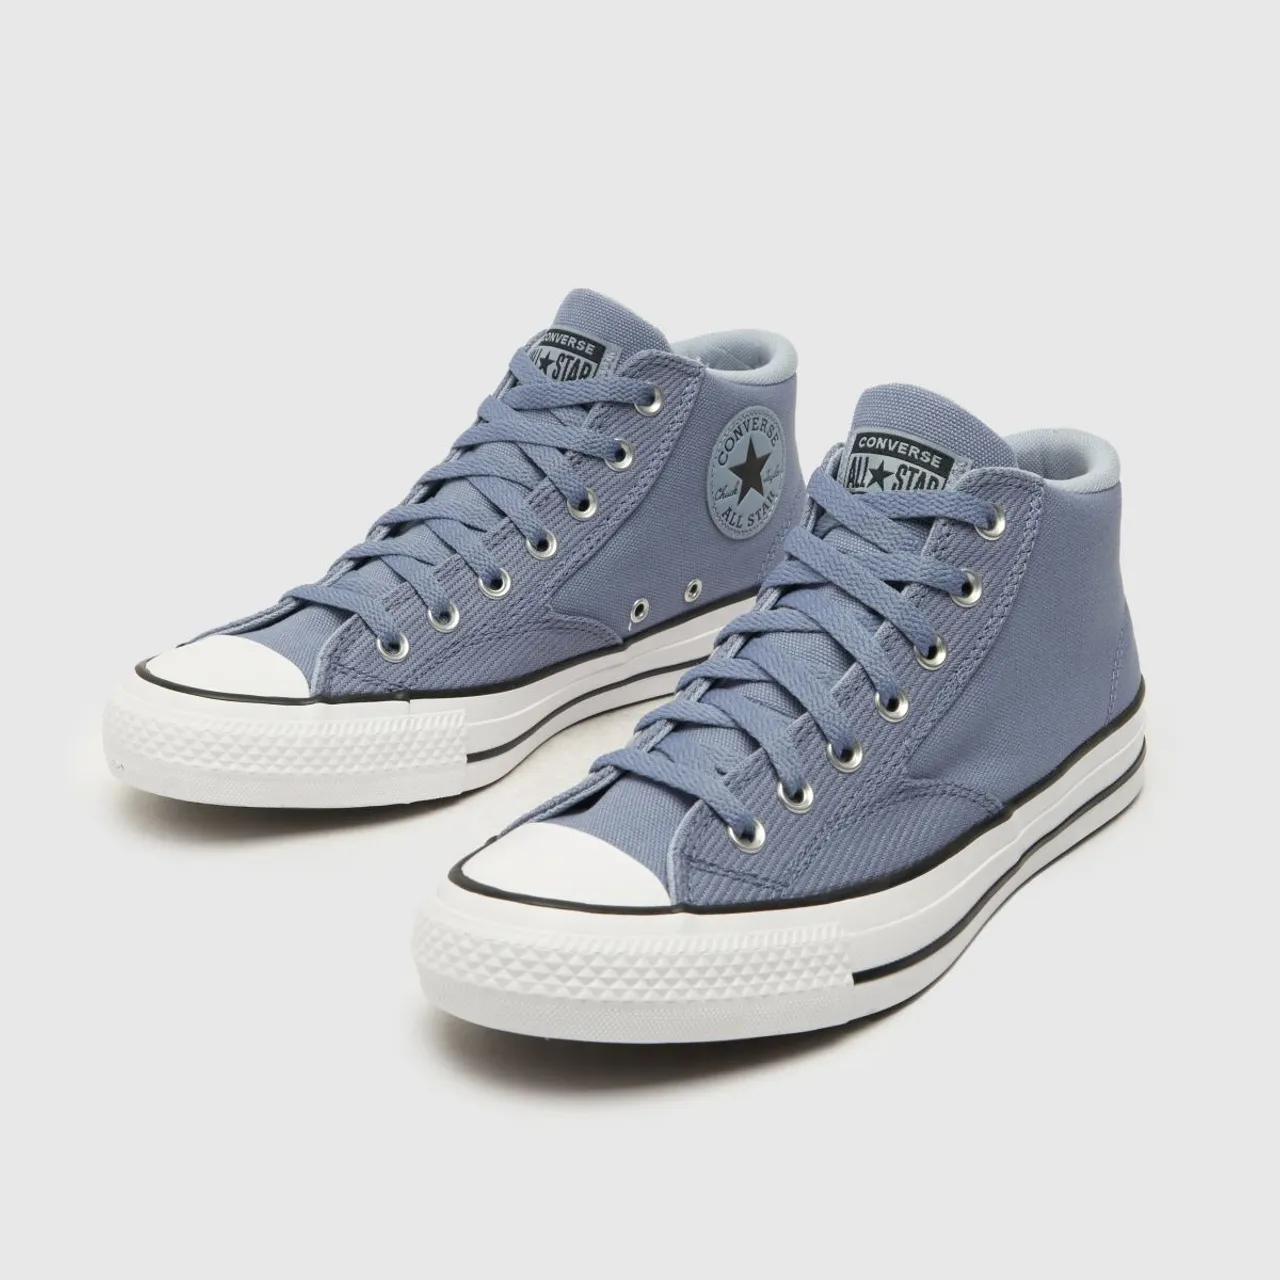 Converse All Star Malden Trainers In Blue